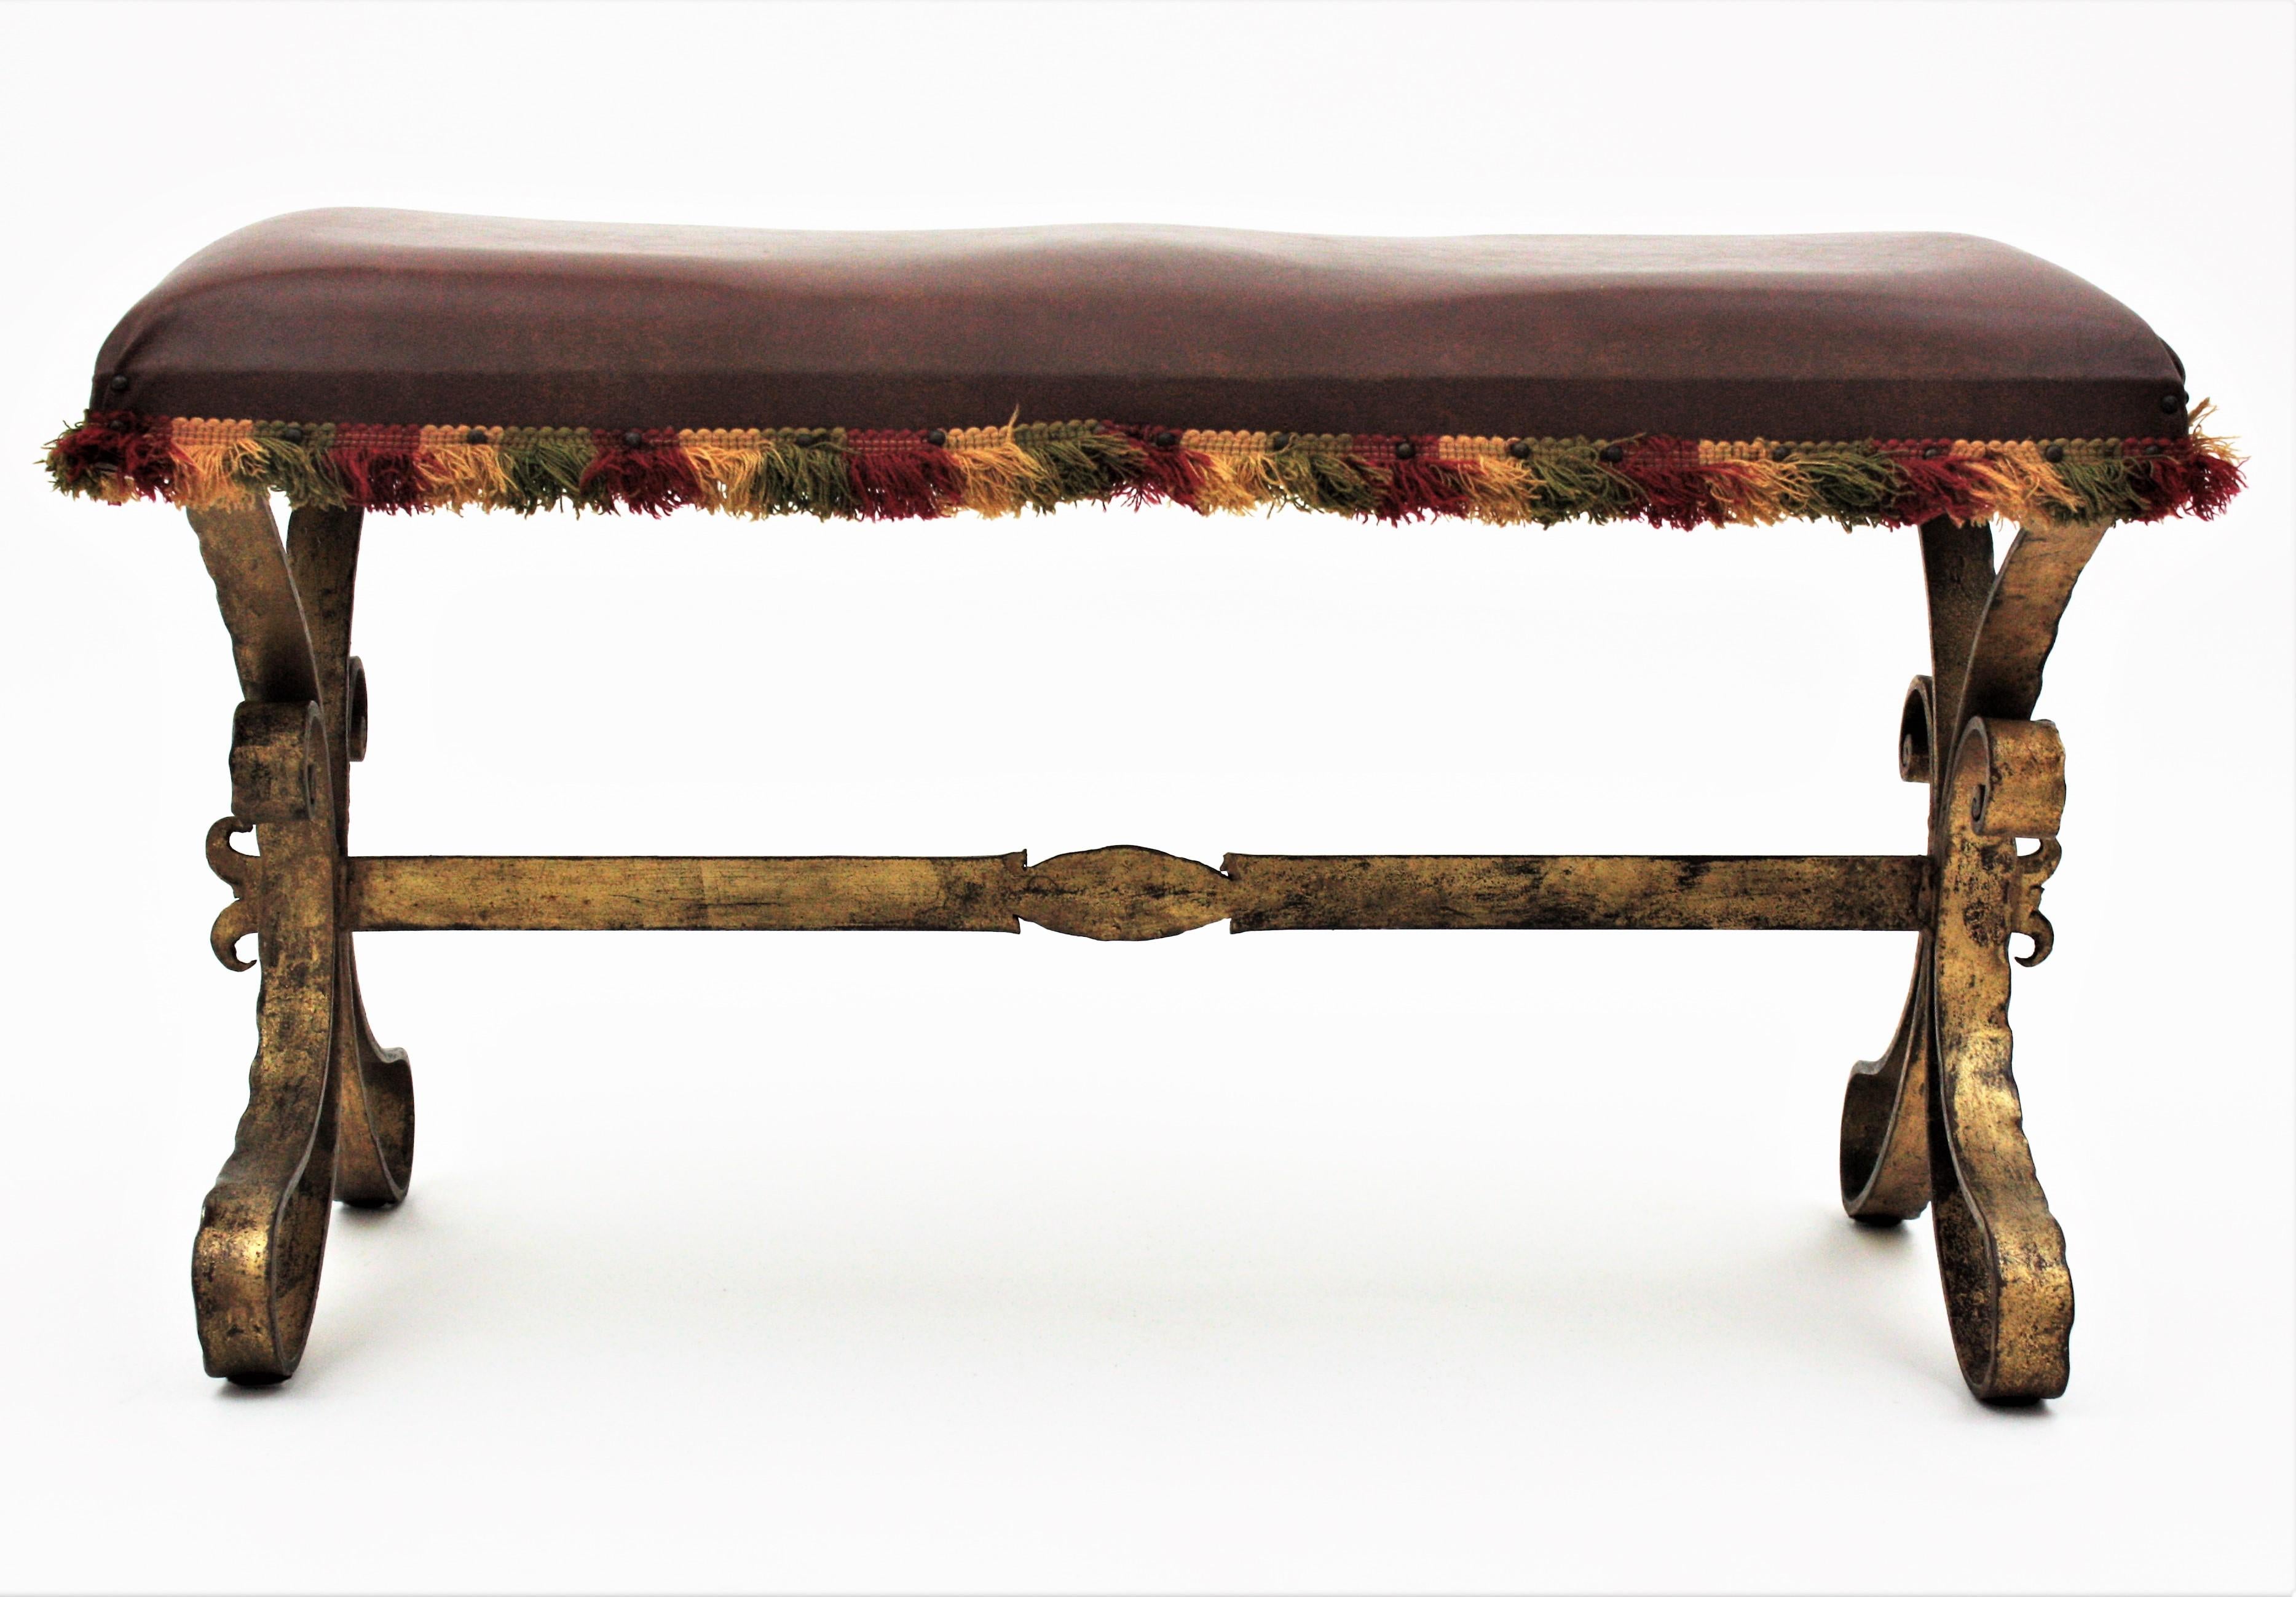 Stylish Neo-Baroque hand-hammered iron bench with looped feet in the style of Gilbert Poillerat, France, 1940s.
This bench has a seat with its original vintage fringed upholstery. It stands on a four-footed hand forged iron base and each foot has